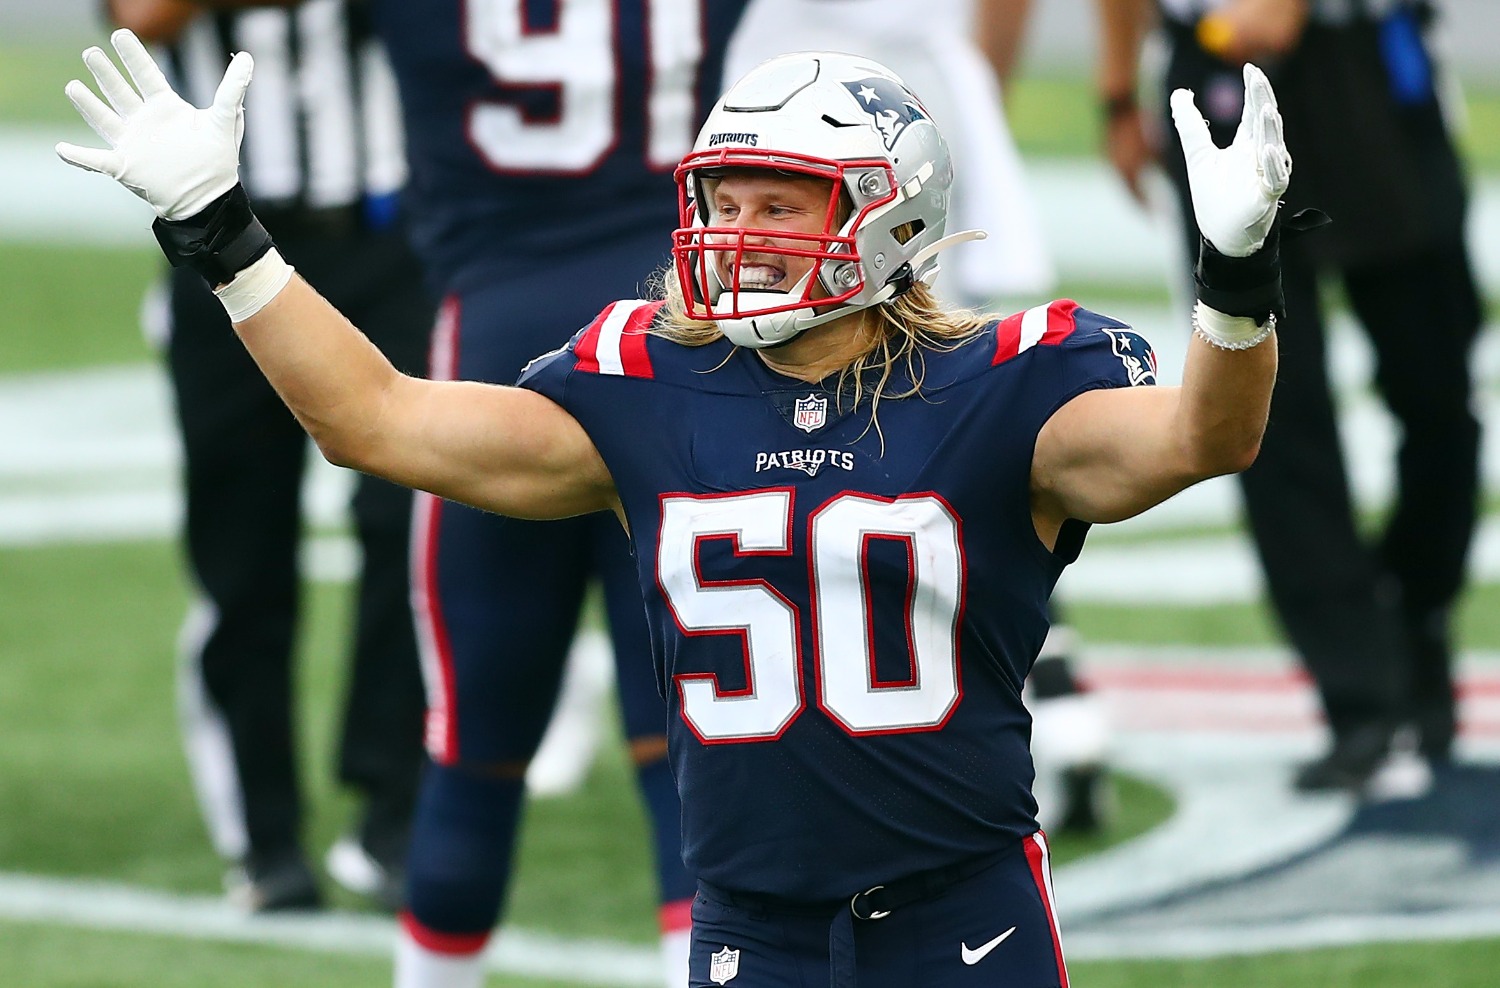 Chase Winovich has become a breakout star with the Patriots, and he also happens to be one of the NFL's biggest bargains given his cheap salary and high level of production.